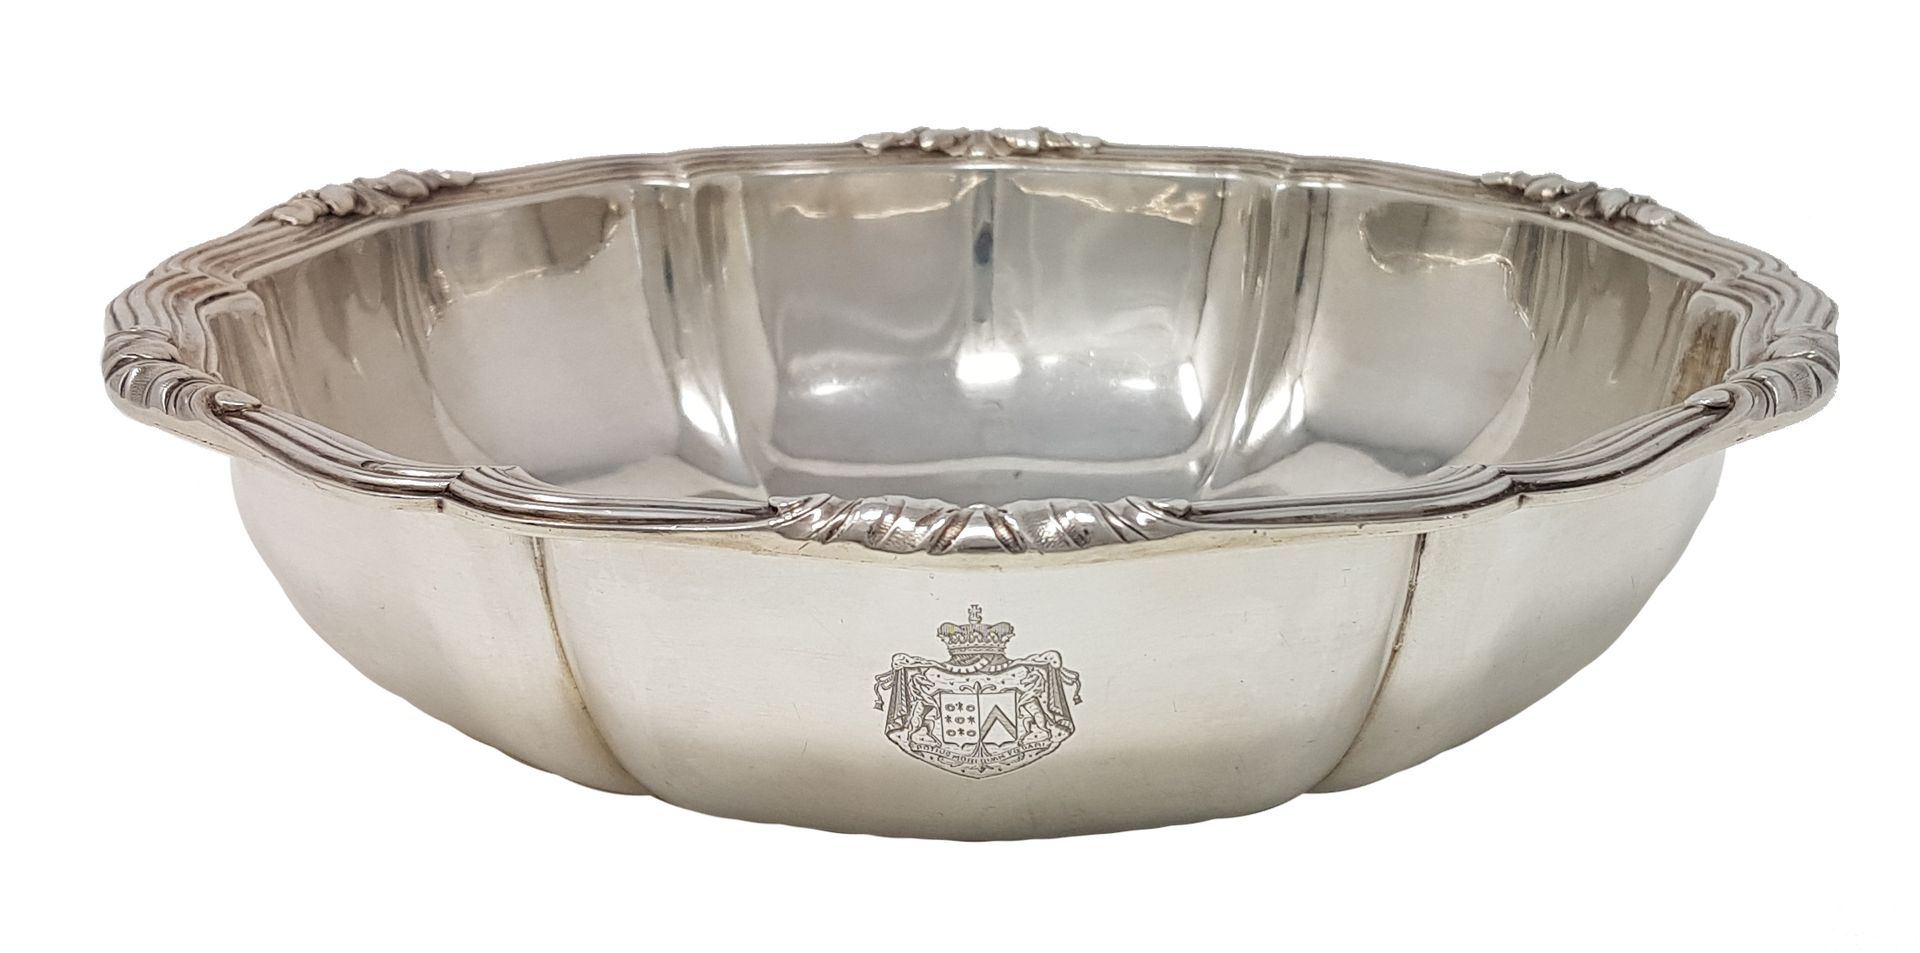 BOINTABURET 
A silver bowl engraved with a coat of arms stamped with a crown and&hellip;